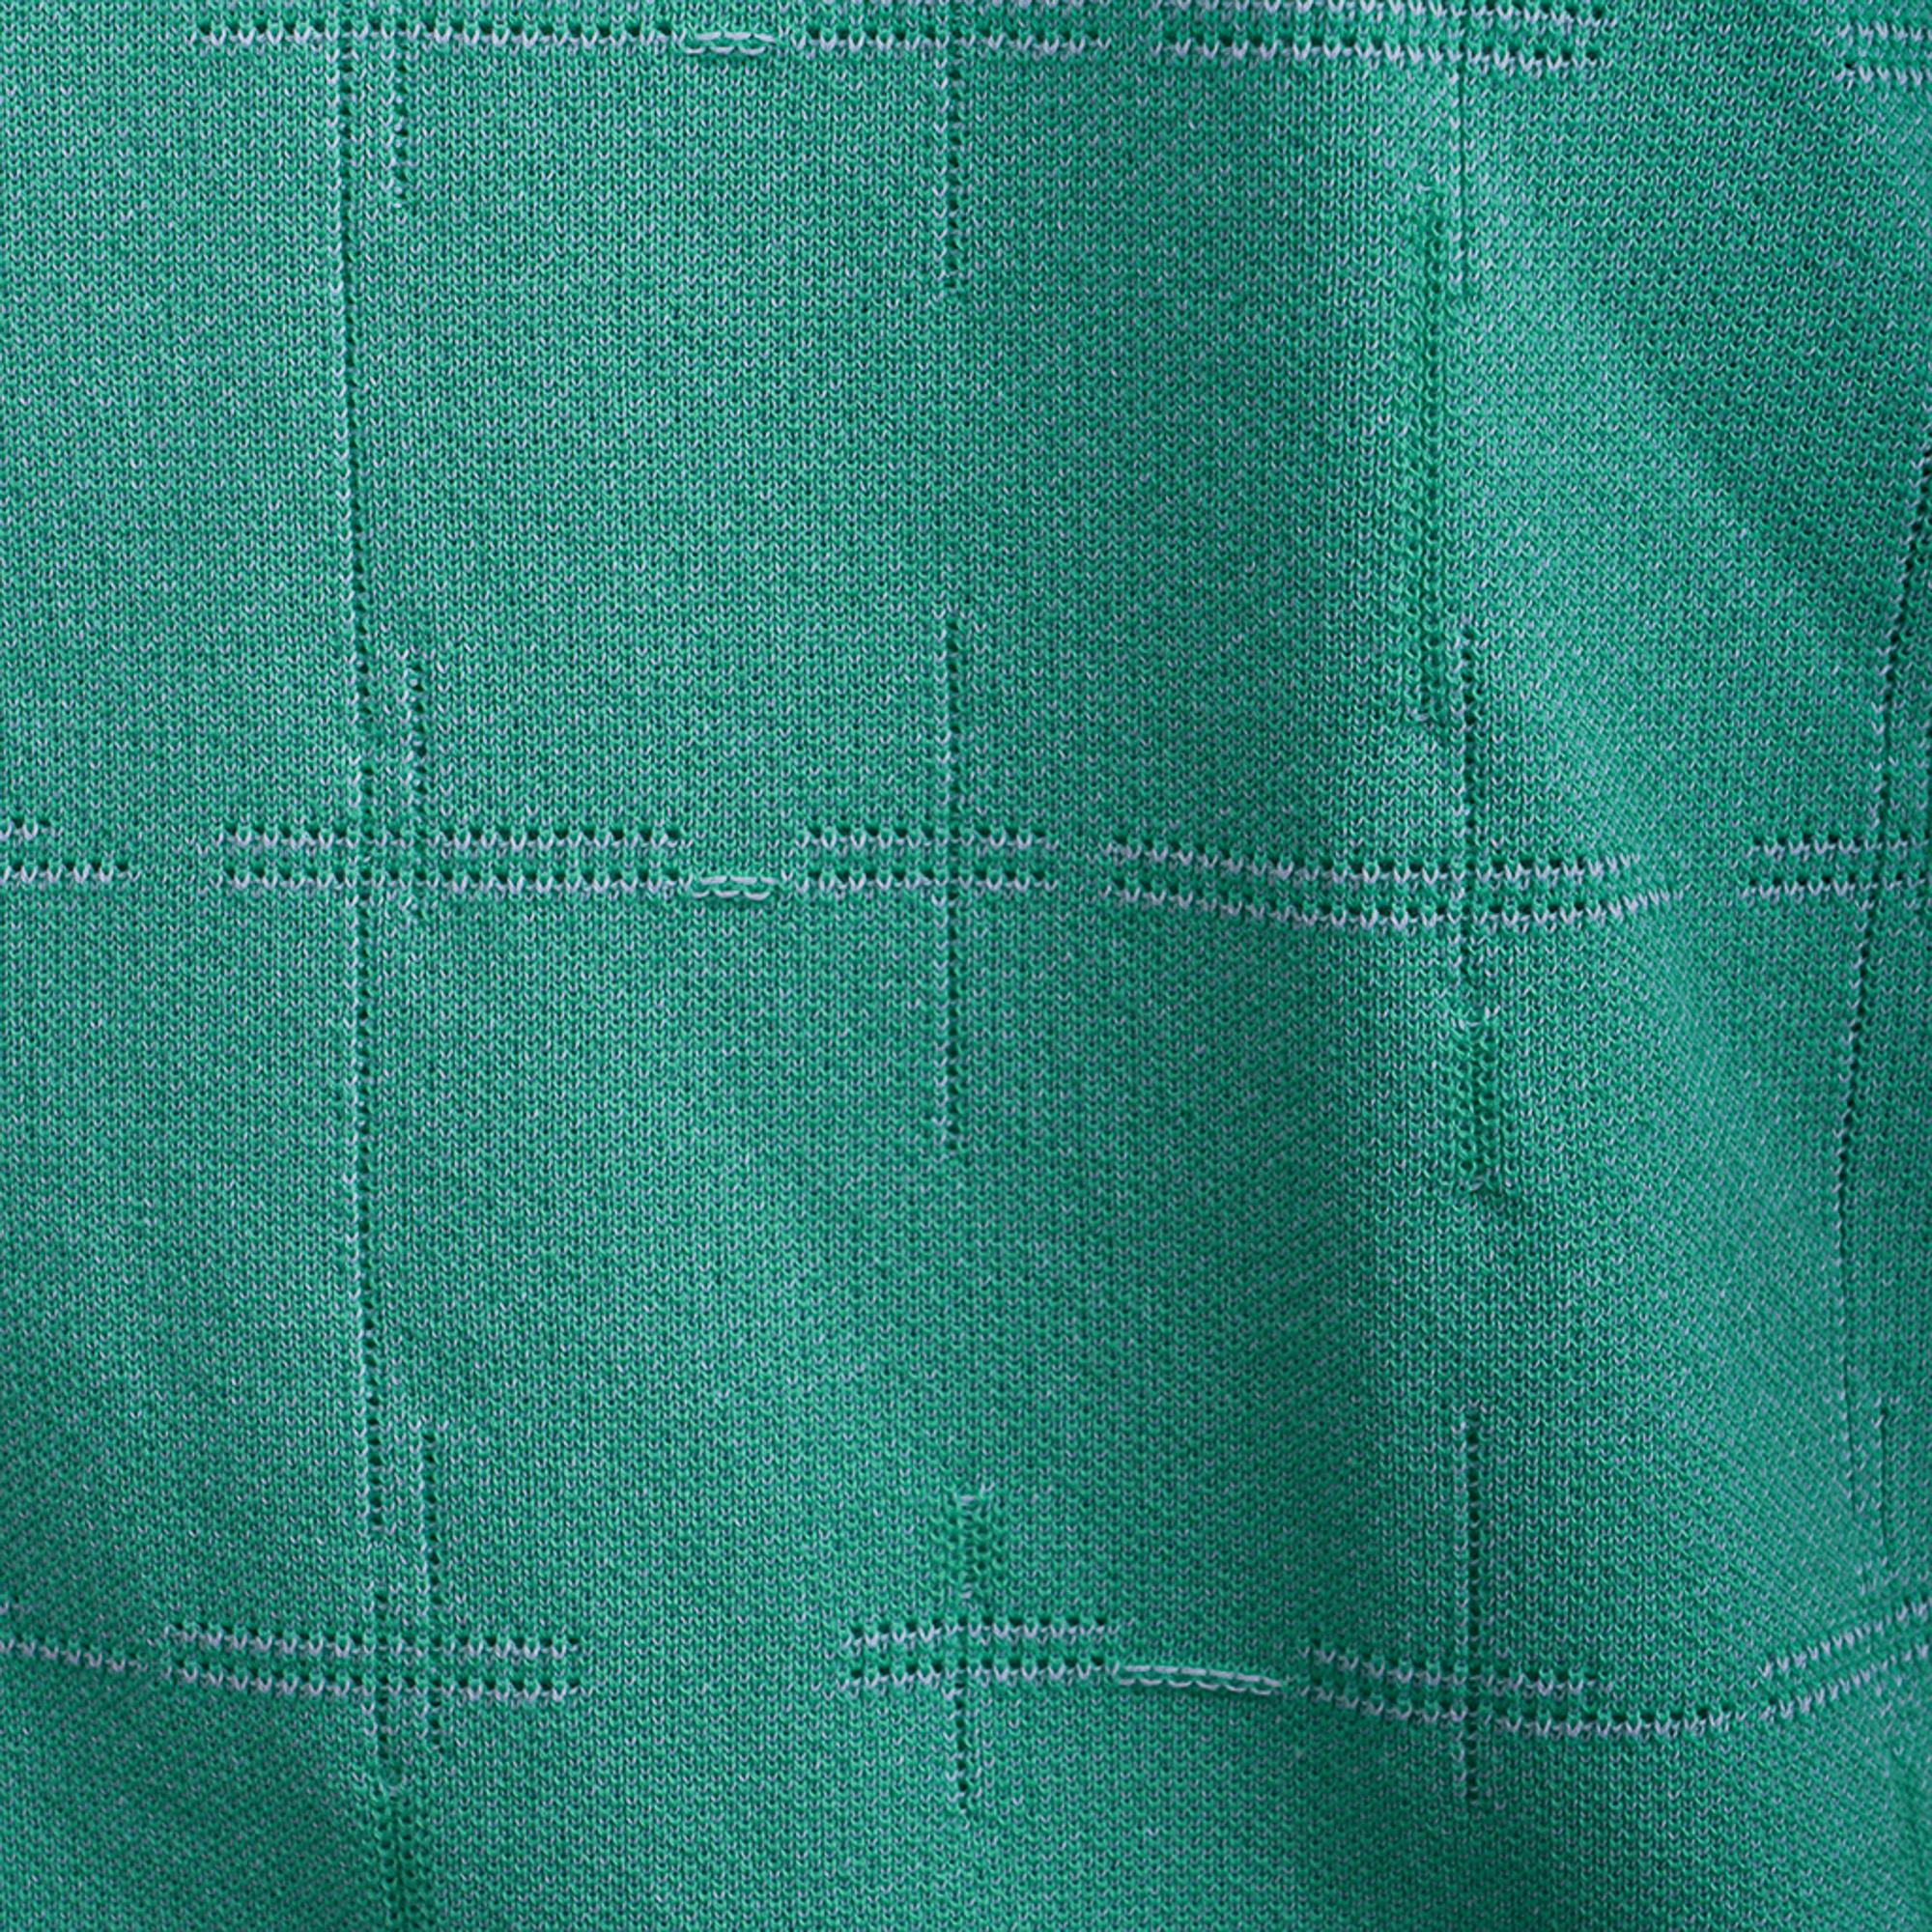 Hermes Men's H en Carreaux Boxy Fit Polo Shirt Vert Tendre Short Sleeve M In New Condition For Sale In Miami, FL